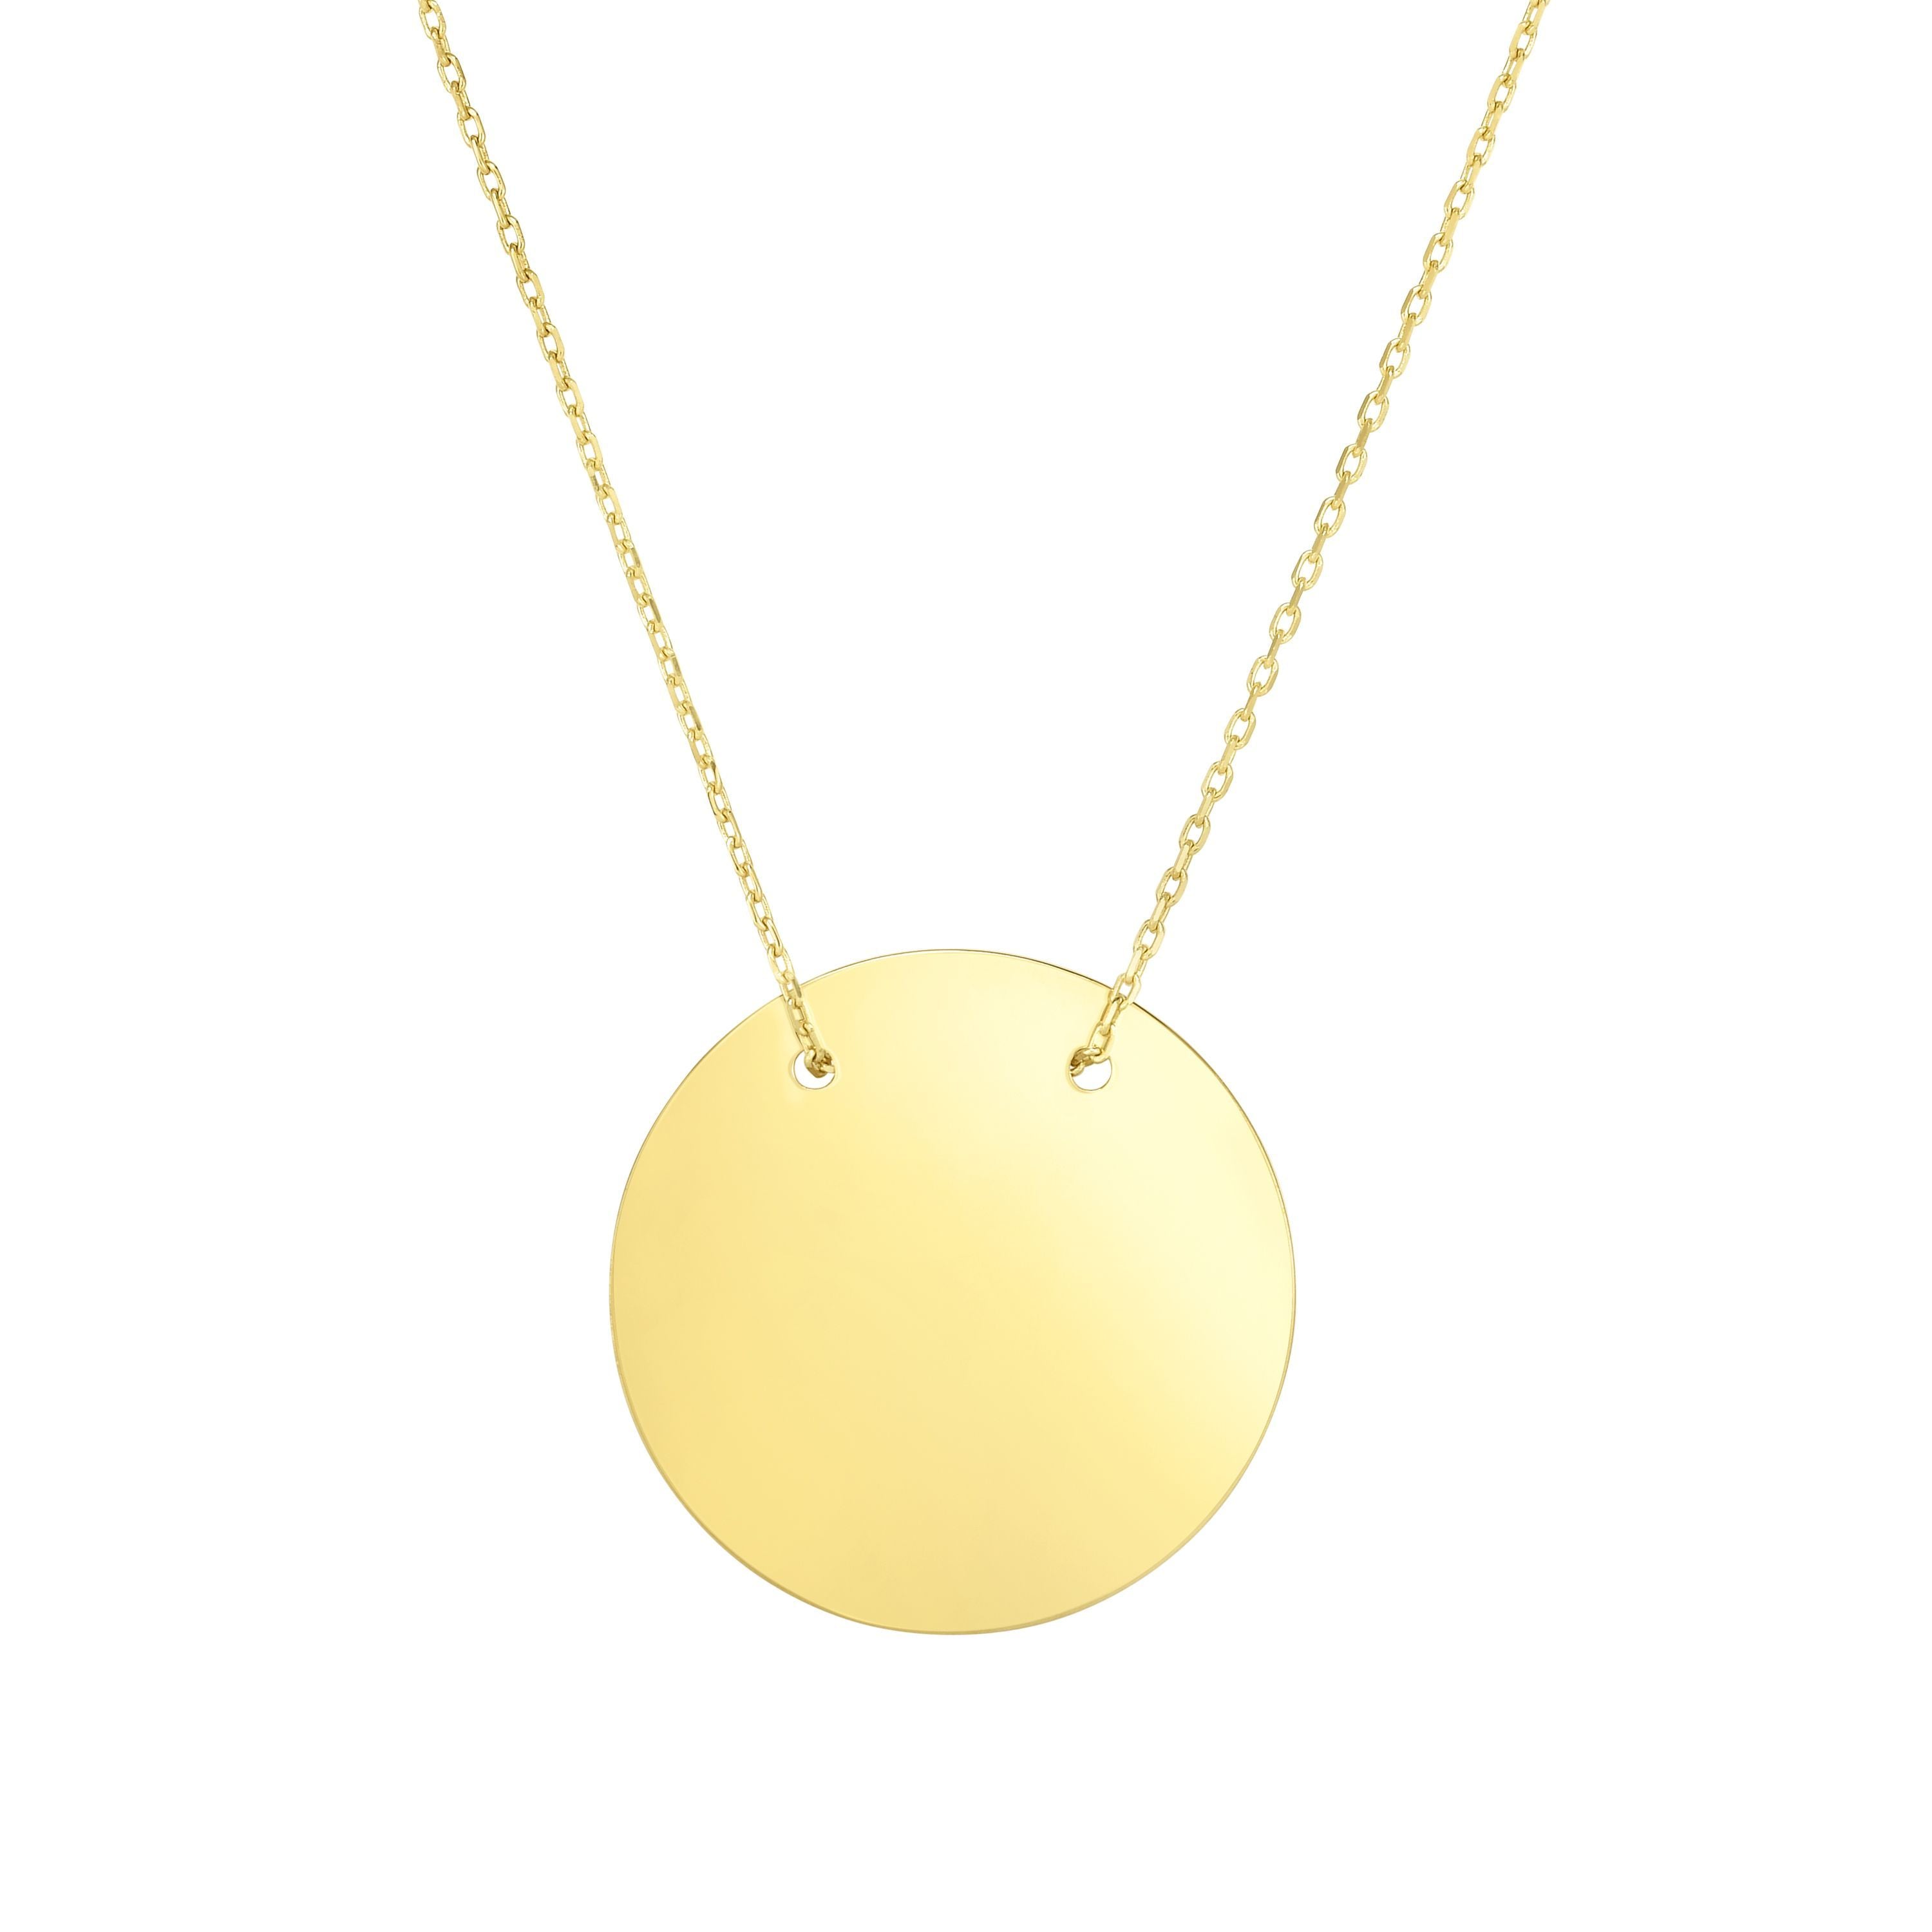 14k Yellow Gold Round Disc Pendant Necklace, 18"